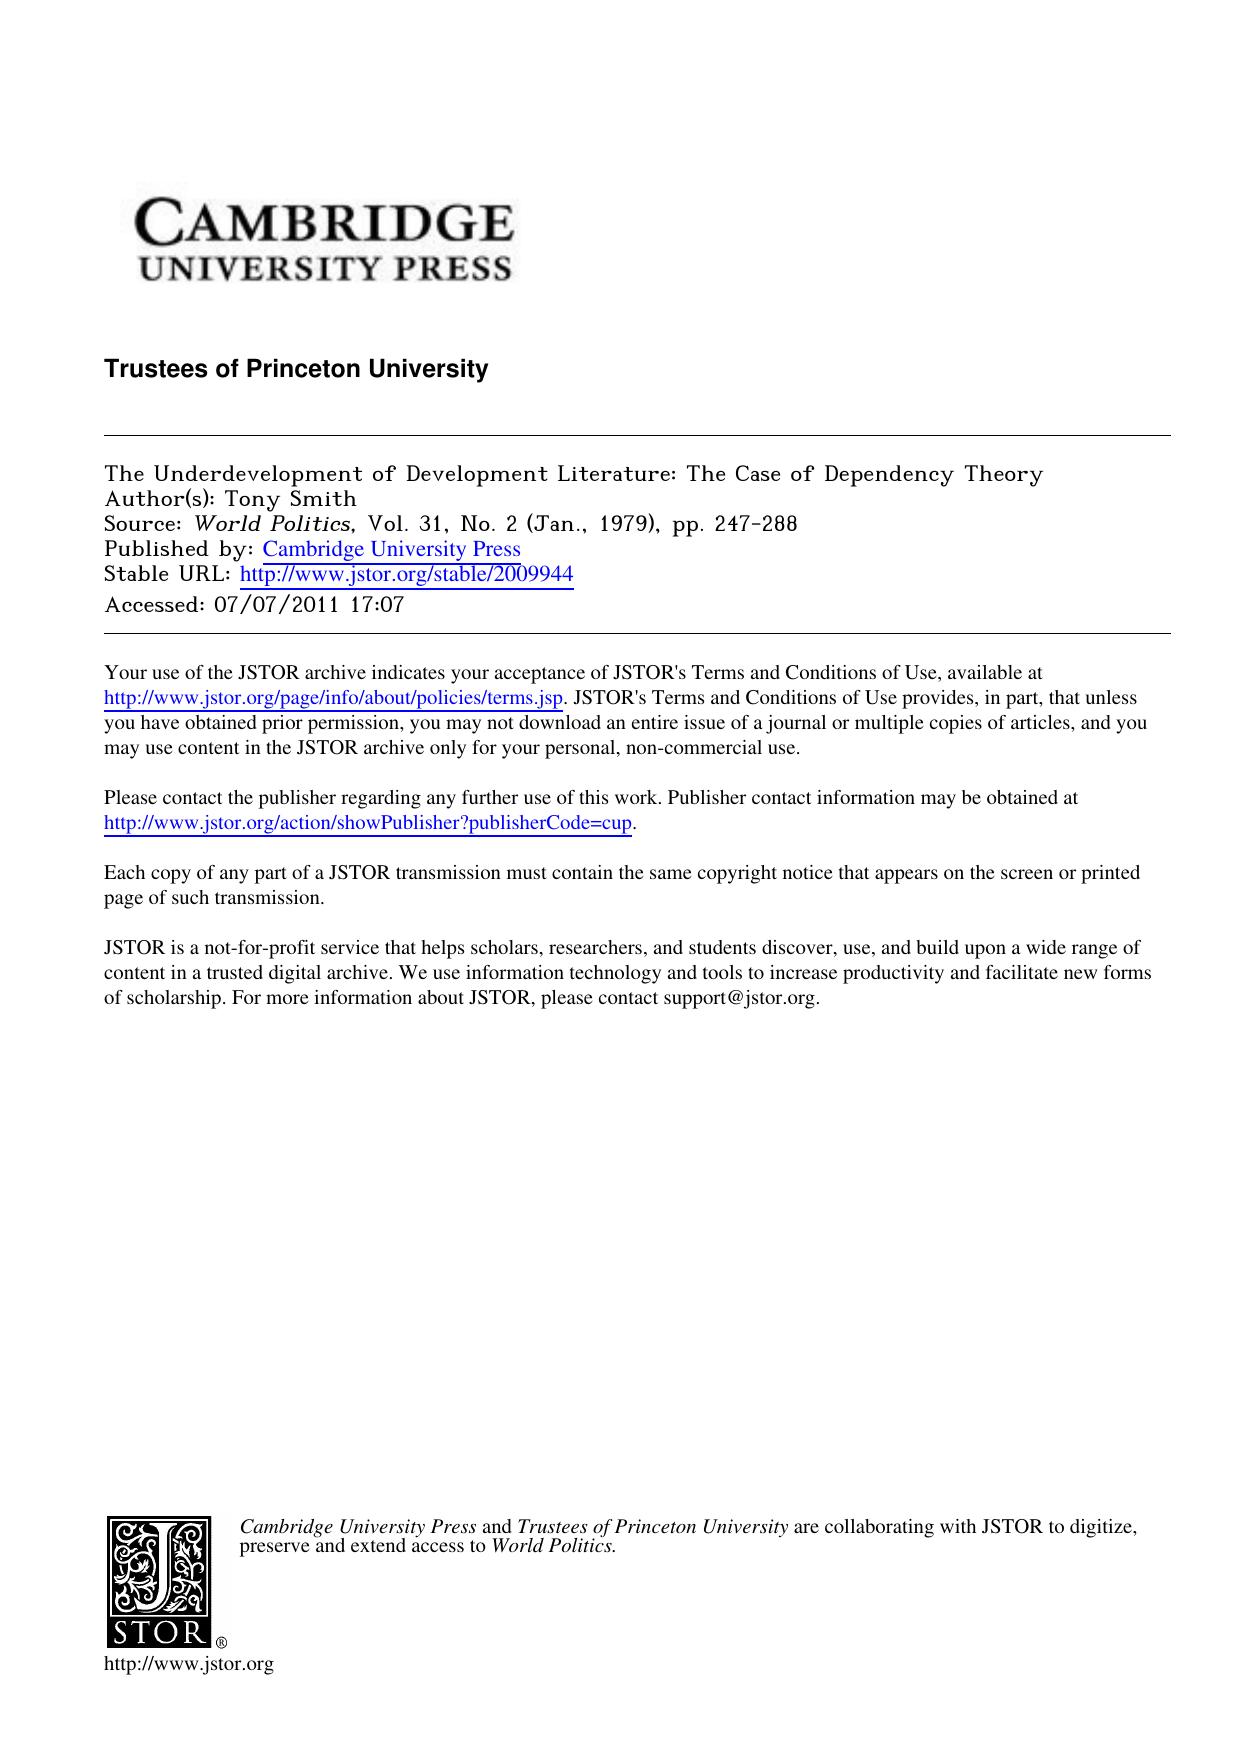 The Underdevelopment of Development Literature: The Case of Dependency Theory